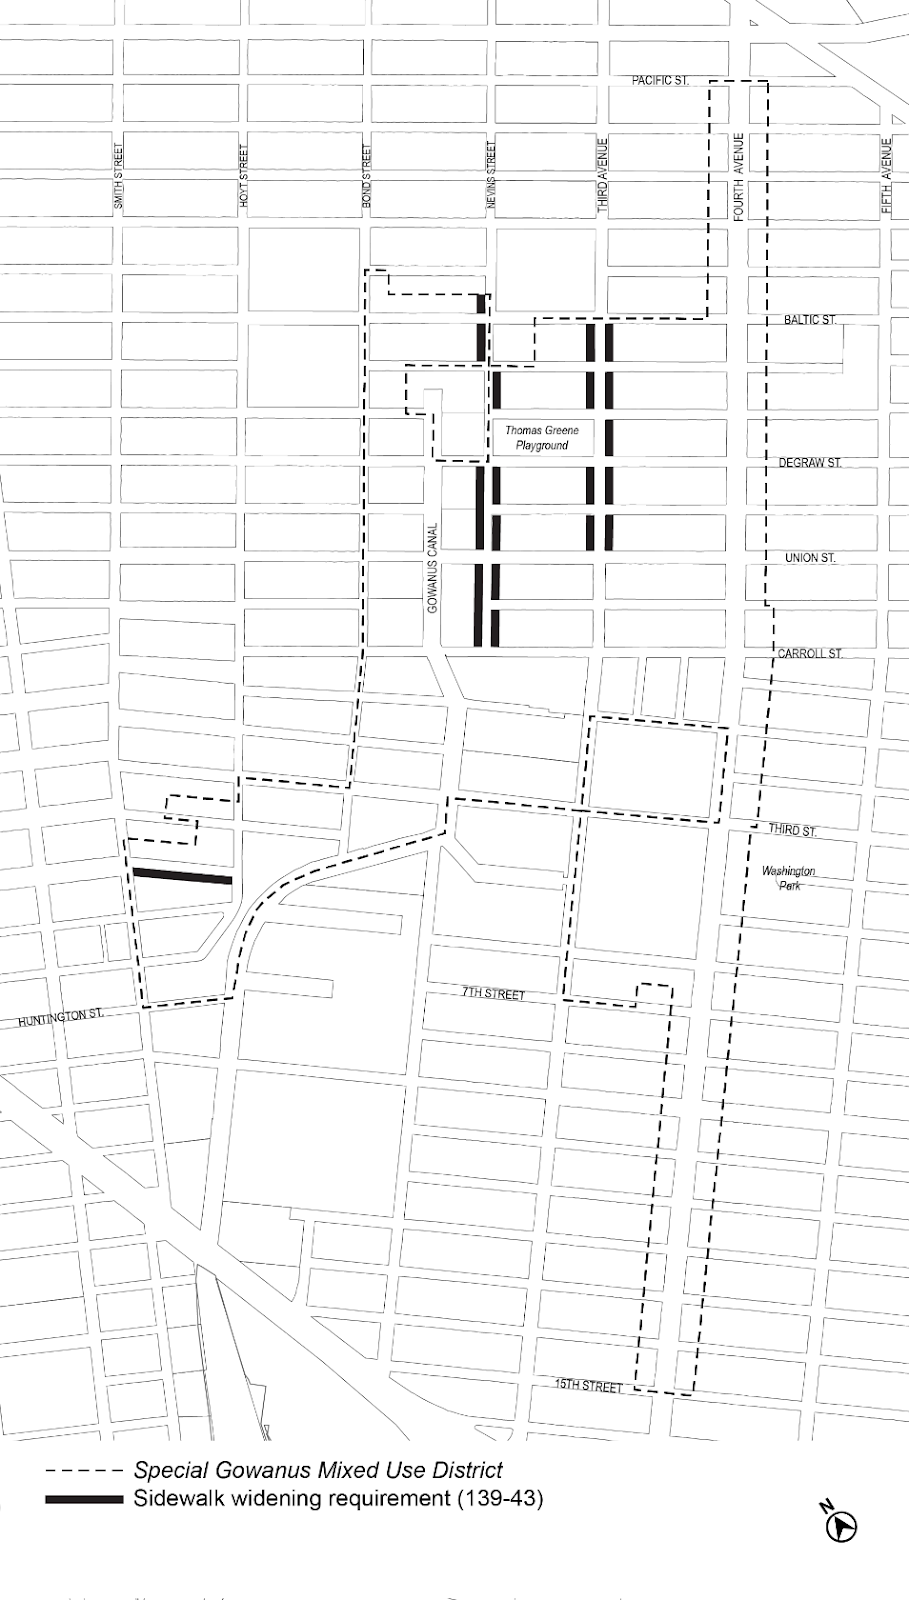 Zoning Resolutions Chapter 9: Special Gowanus Mixed Use District APPENDIX A.3